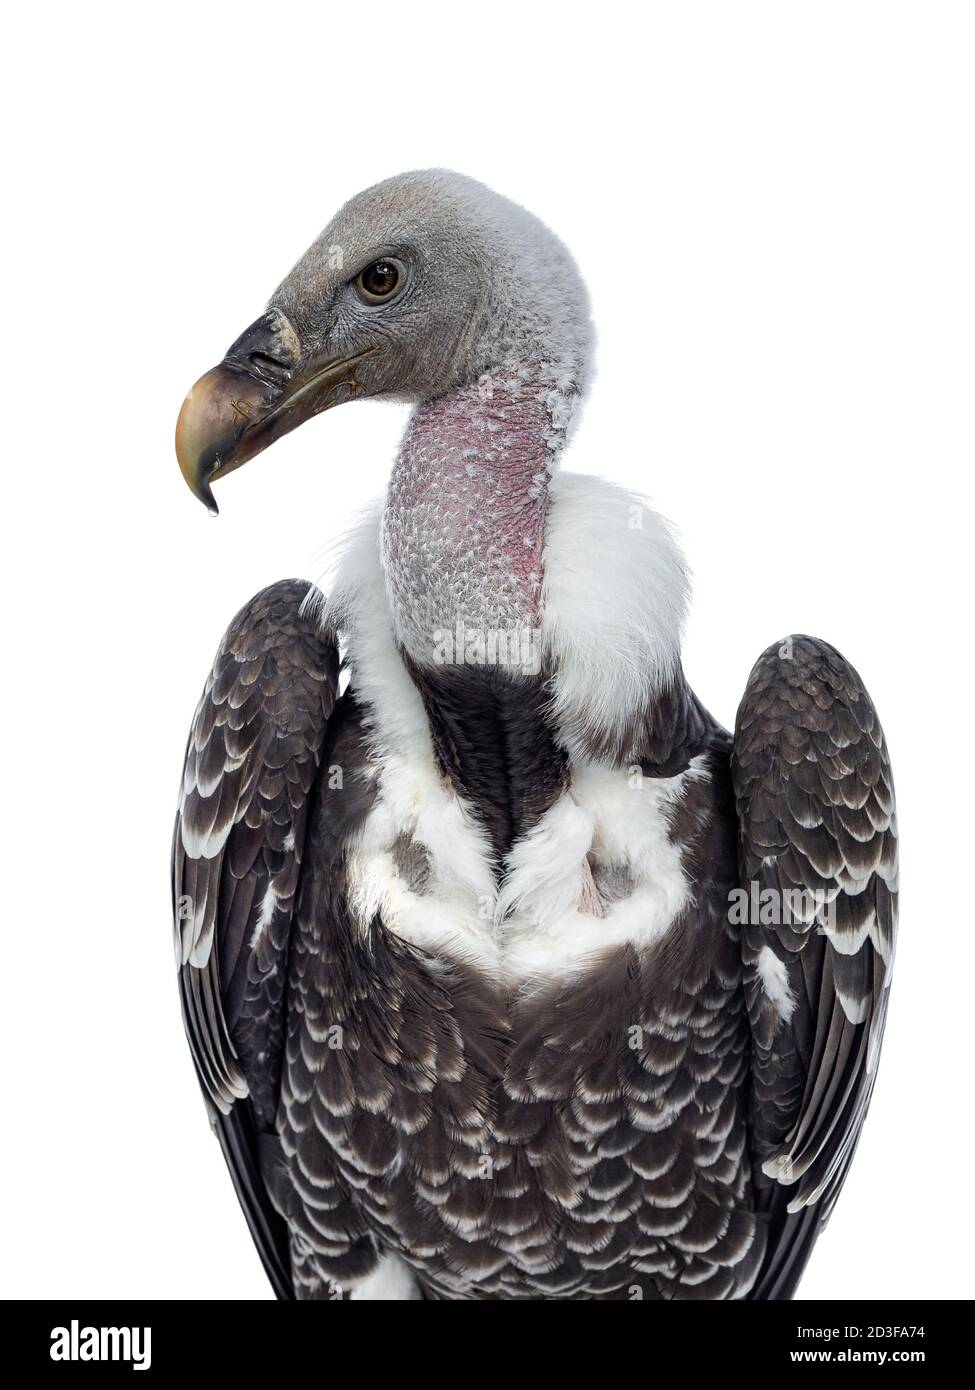 Head shot of Young adult Rüppell's griffin vulture facing front. Head up and turned to the side. Isolated on white background. Stock Photo